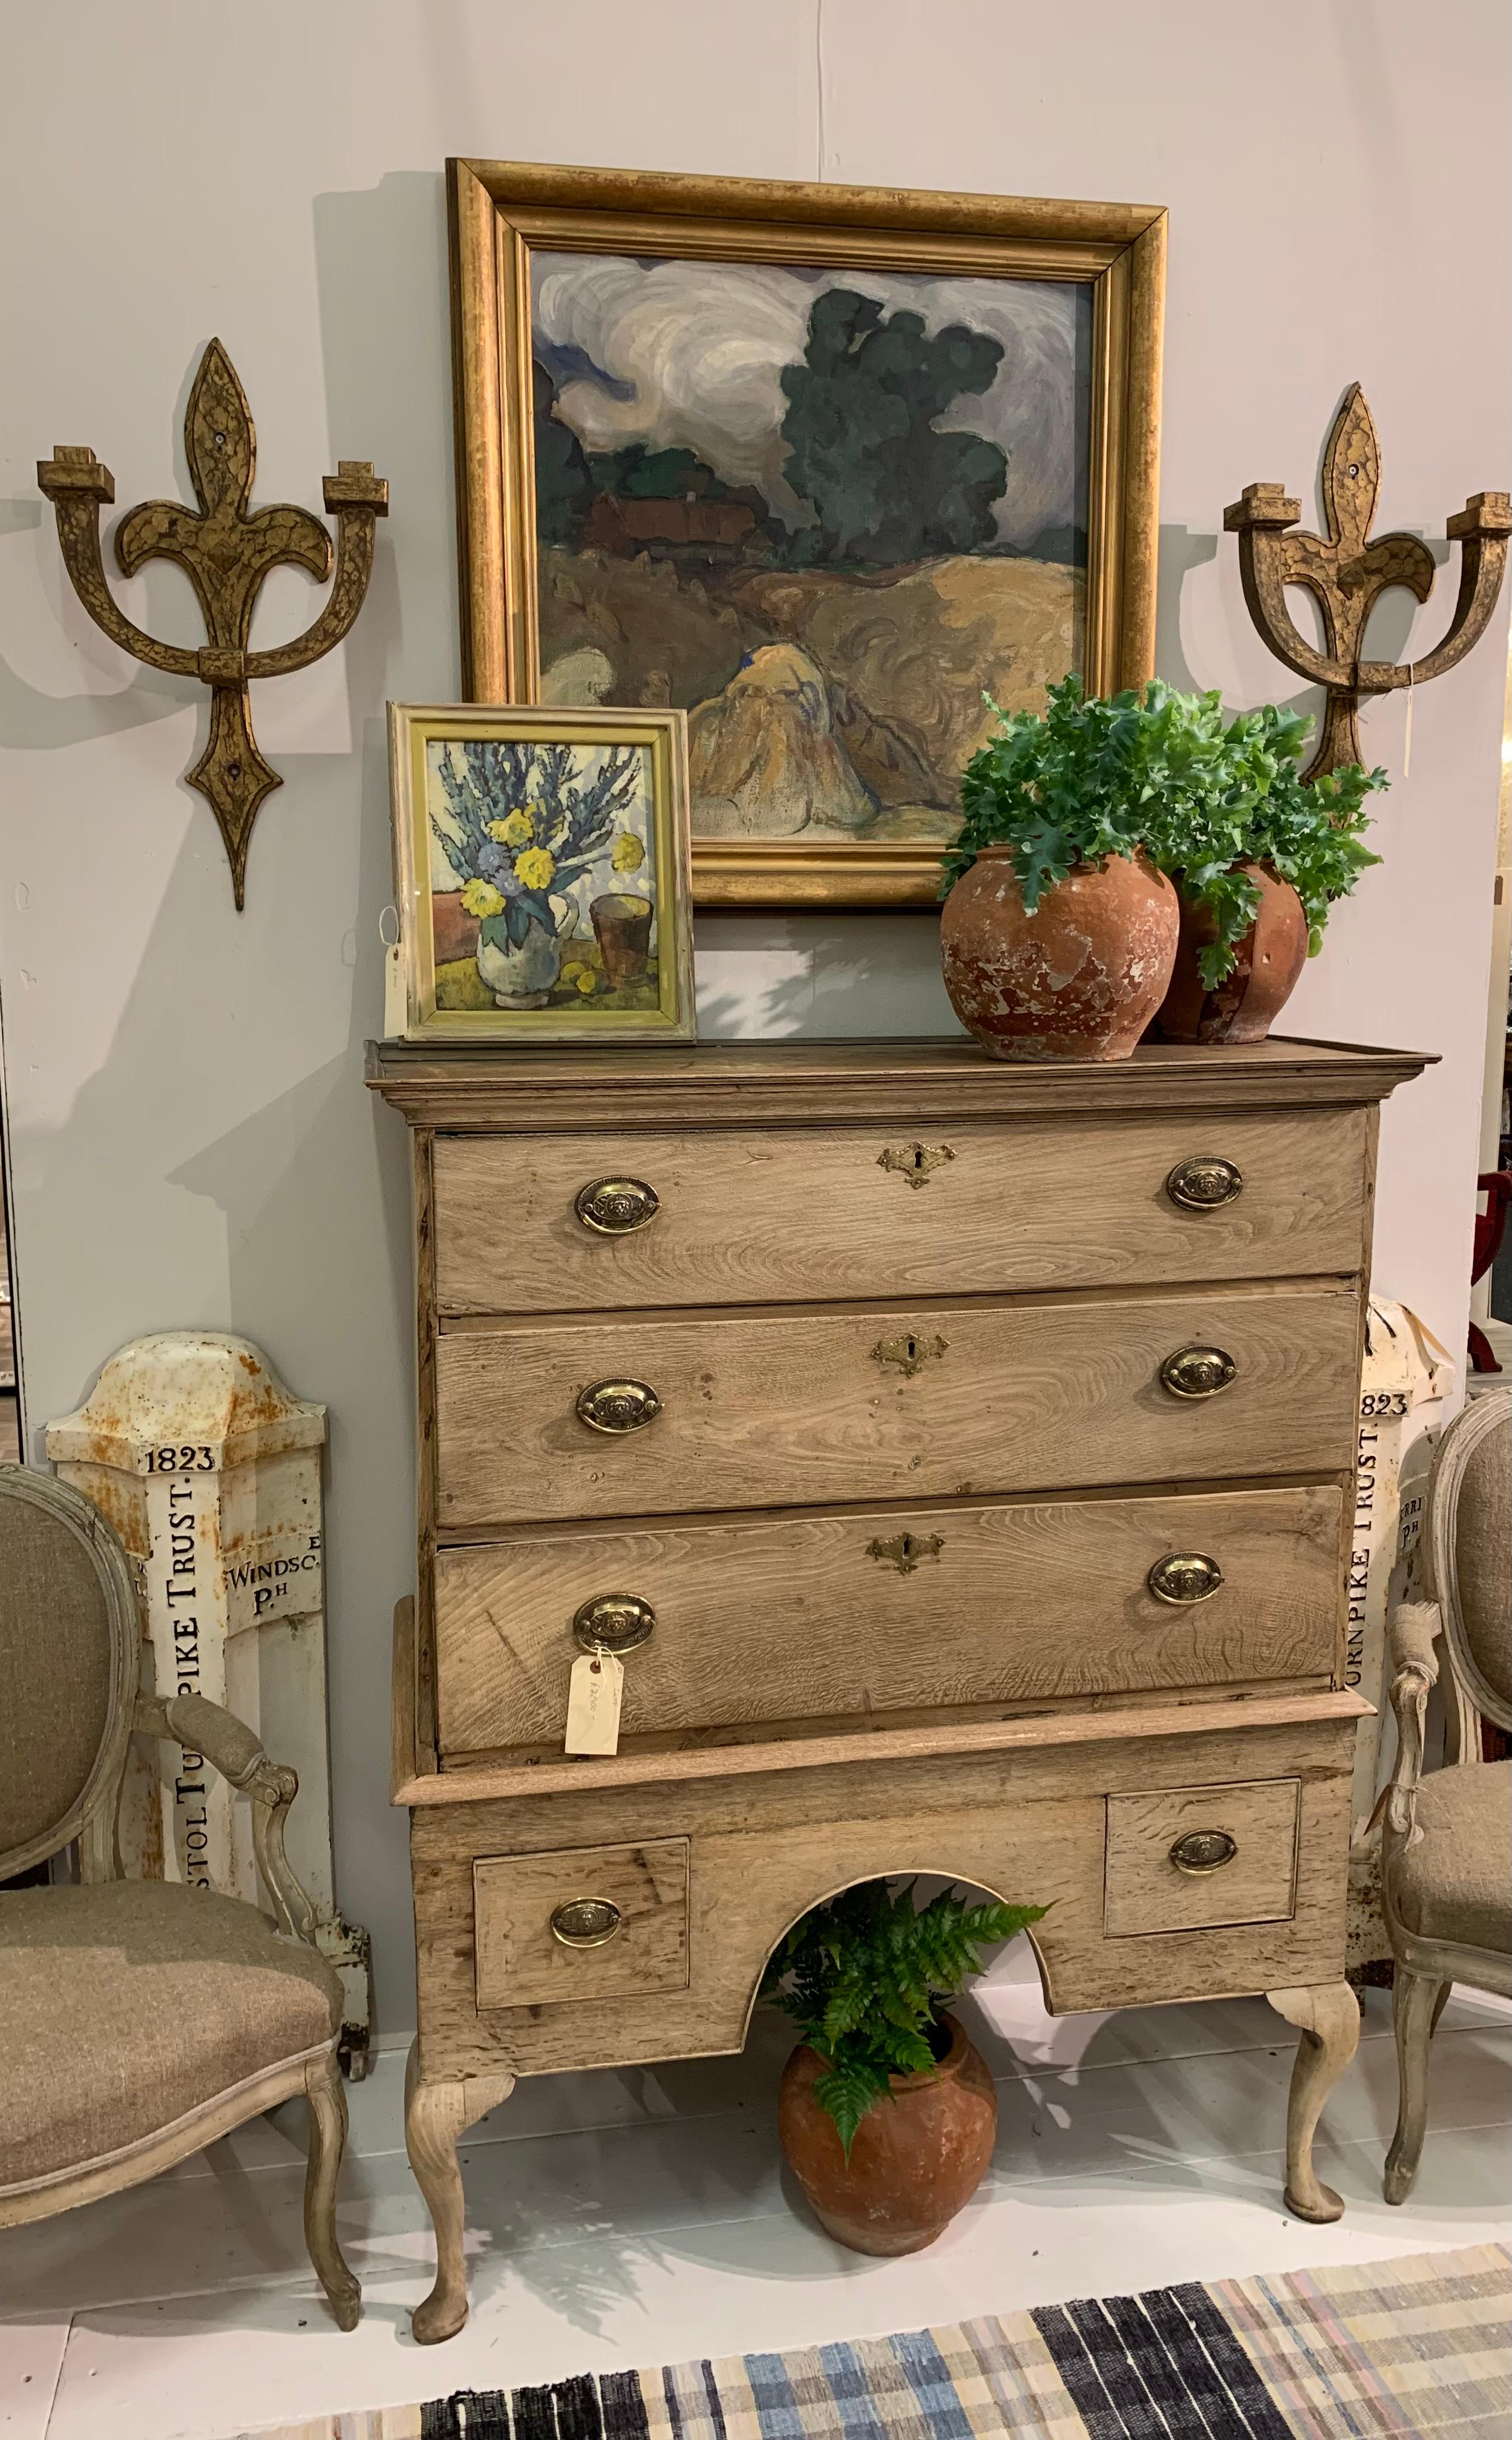 Circa 18th century Oak three larger drawer chest which sits on a stand and features drop handles. The three-drawer section sits on a base stand with pad feet and two deep narrow drawers which sit on either side.

A simple and charming country